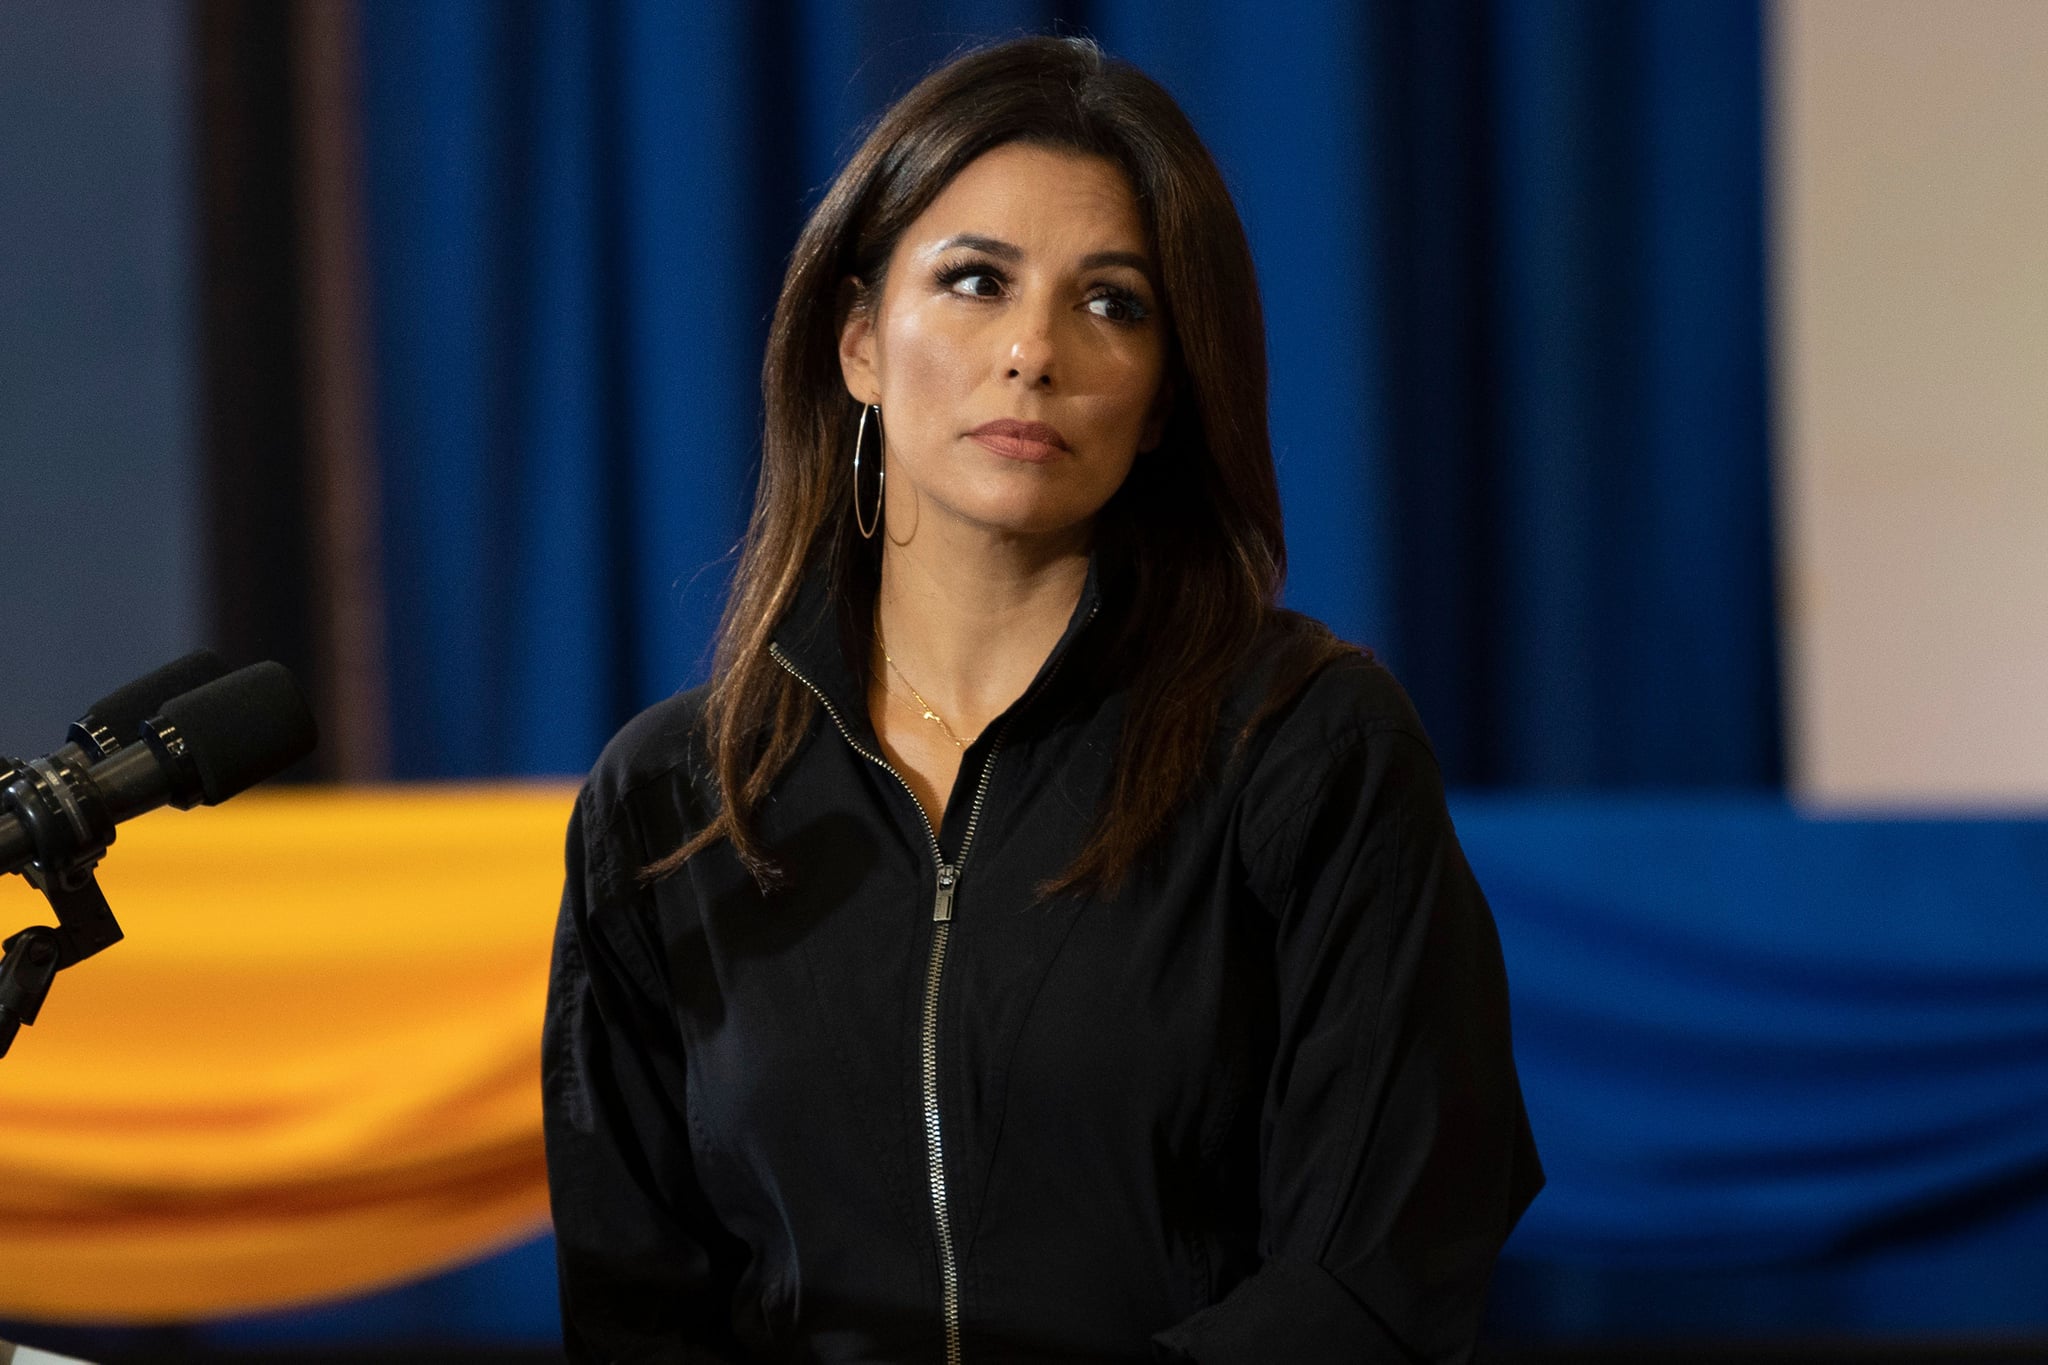 Eva Longoria, actress, activist, and Co-Founder of Latino Victory, speaks before Democratic Presidential Candidate Joe Biden as they participate in a Hispanic Heritage Month event at the Osceola Heritage Park in Kissimmee, Florida on September 15, 2020. (Photo by JIM WATSON / AFP) (Photo by JIM WATSON/AFP via Getty Images)